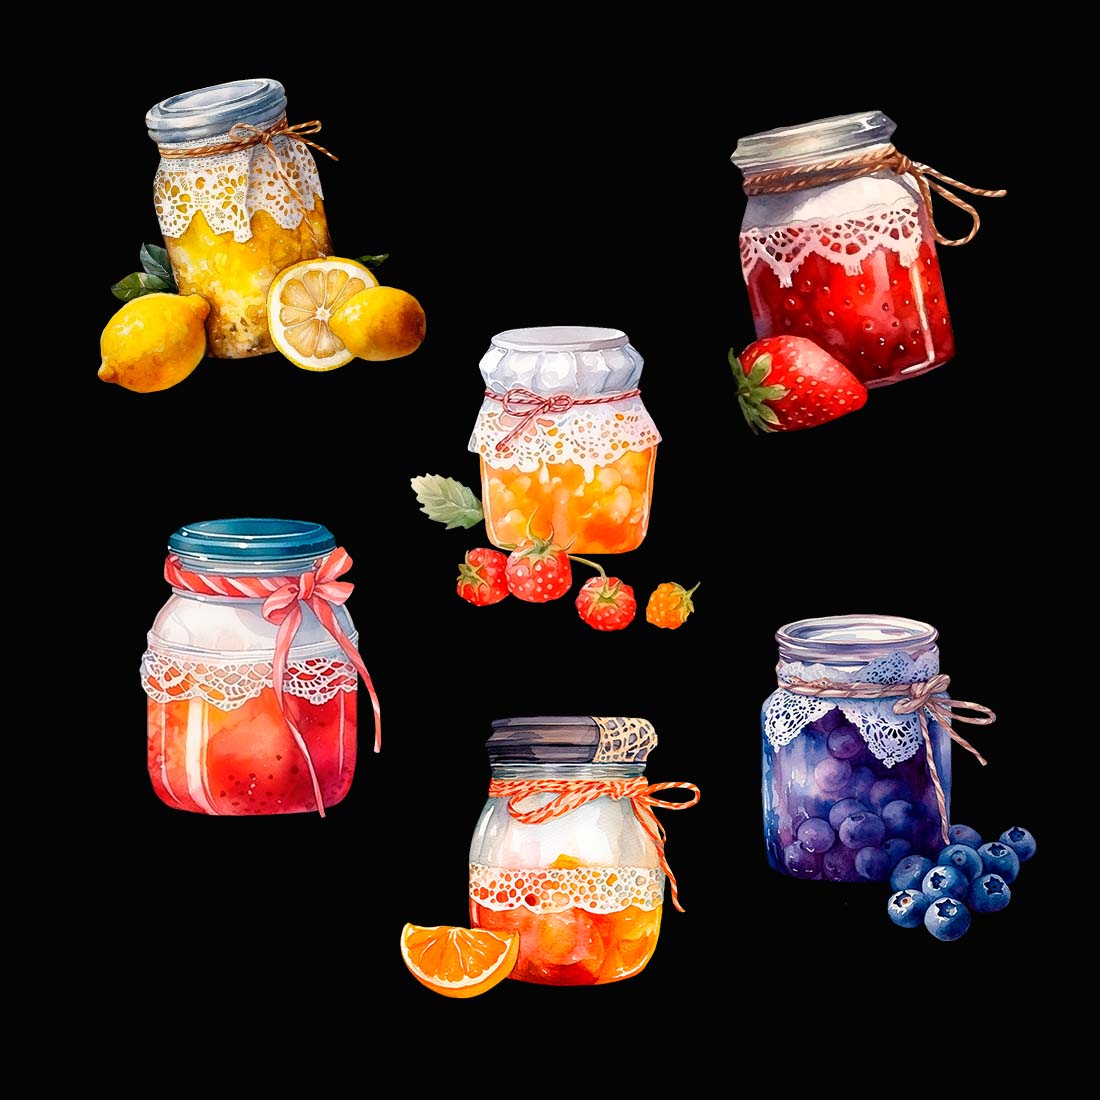 Watercolor Jar of jam Clipart - 6 items in PNG Digital This is a beautiful set of watercolor style, Jar of jam clipart Collection includes 6 Jars of jam: made from lemons, peaches, oranges, blueberries, strawberries, cloudberry These are perfect for your canned food crafts! preview image.